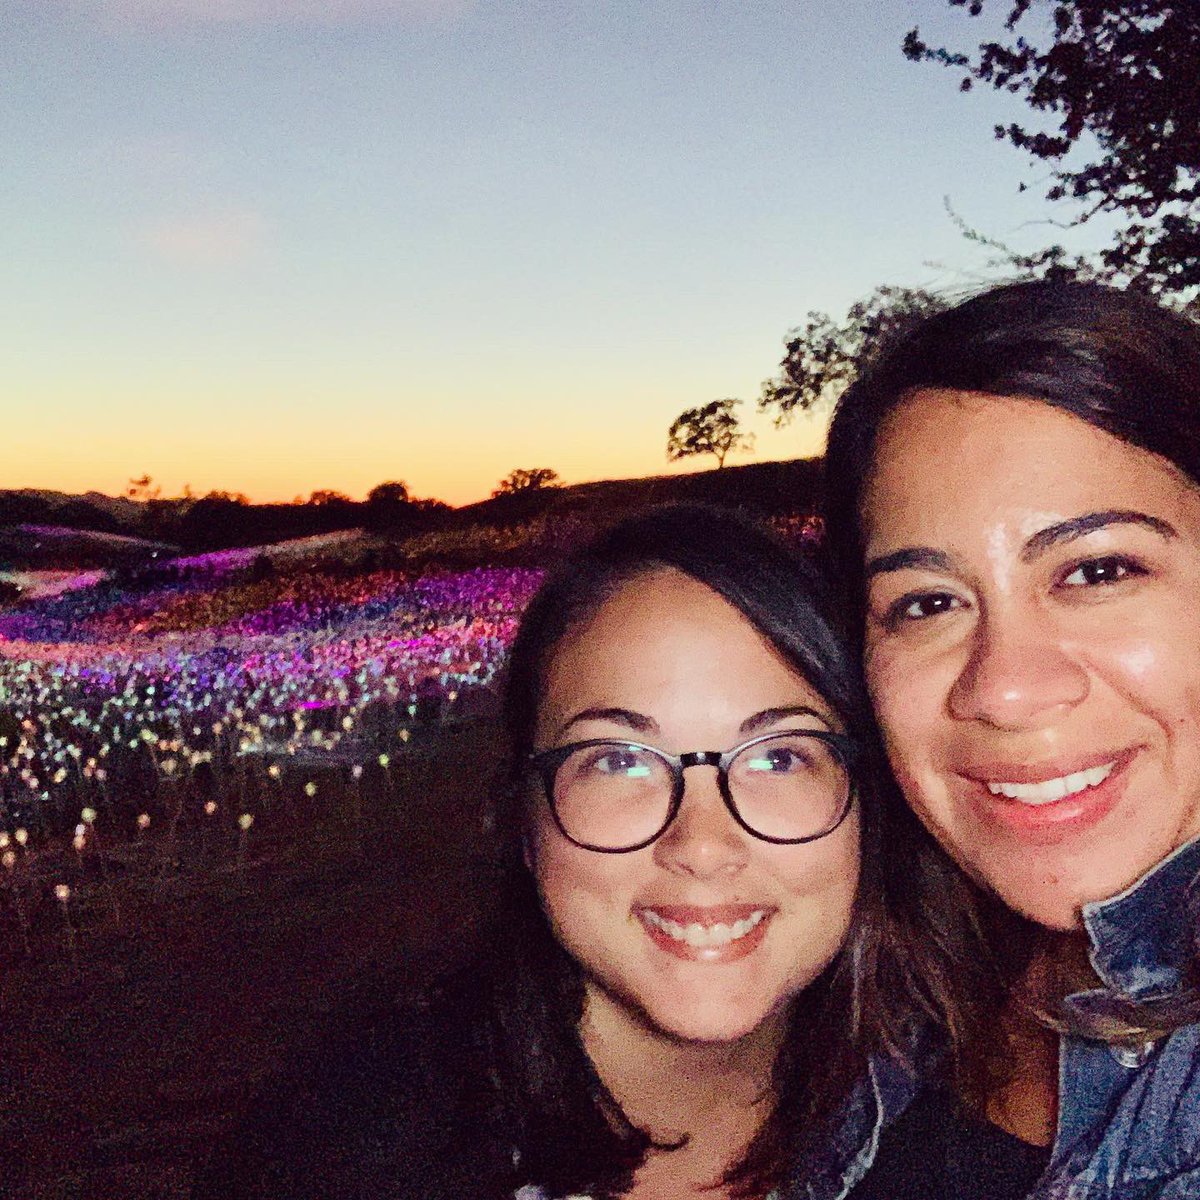 Sensorio Field of Lights with @arki_edlyn  🤩🤩🤩 I’m so inspired to read SciFi now. Looks like a field of wildflowers and neurons and mushrooms and so many more things. 🔮🌌 #roadtrip #pasorobles #california